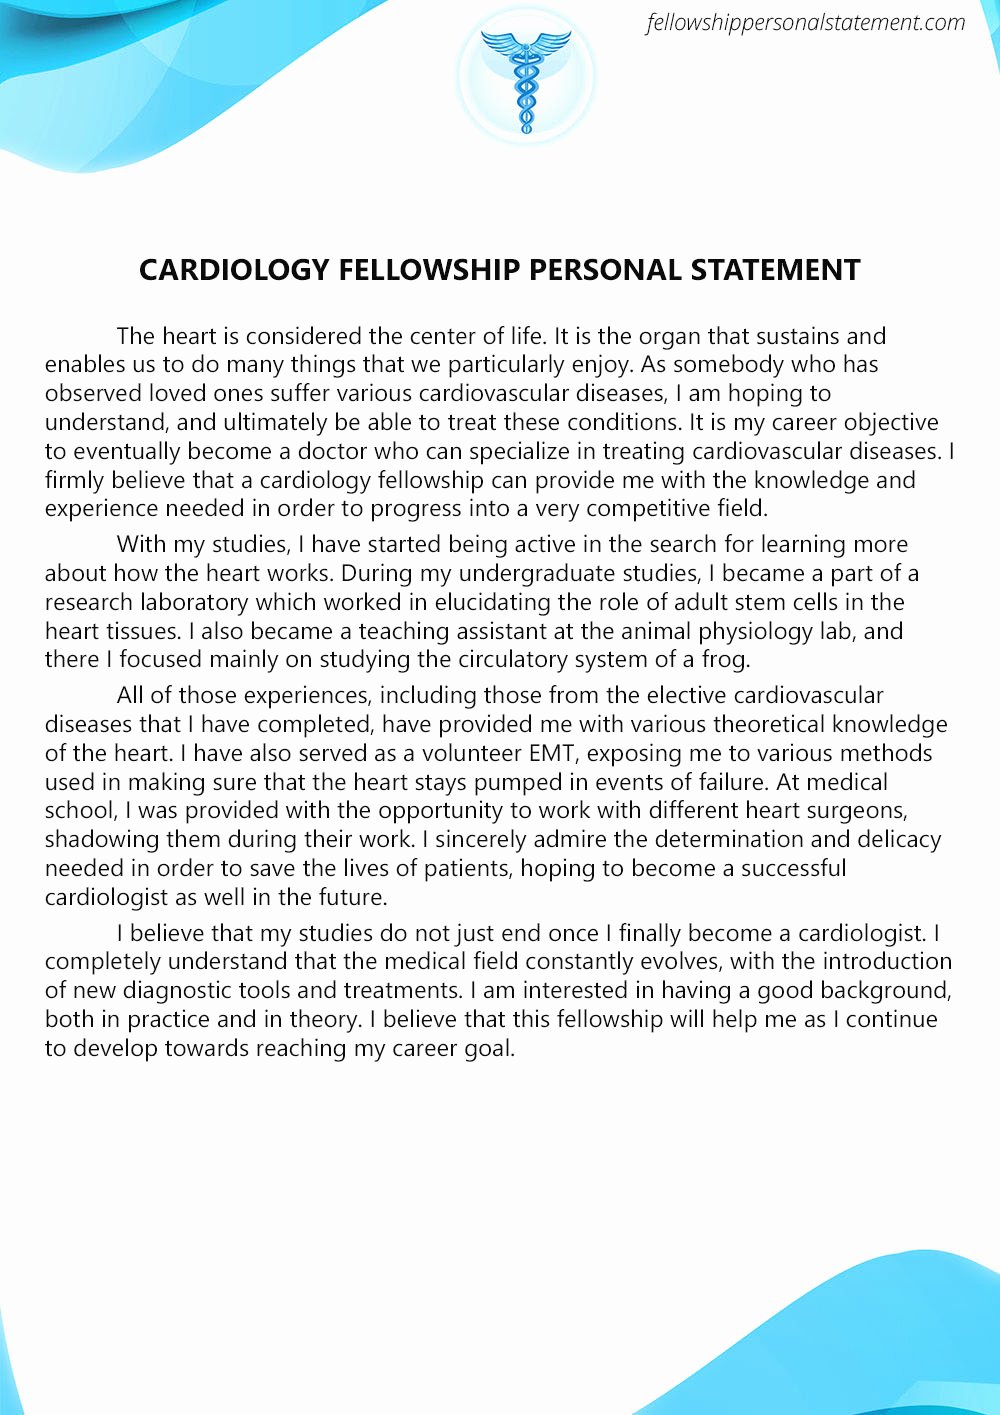 Personal Statement Letter Examples Awesome Exceptional Cardiology Fellowship Personal Statement Writing